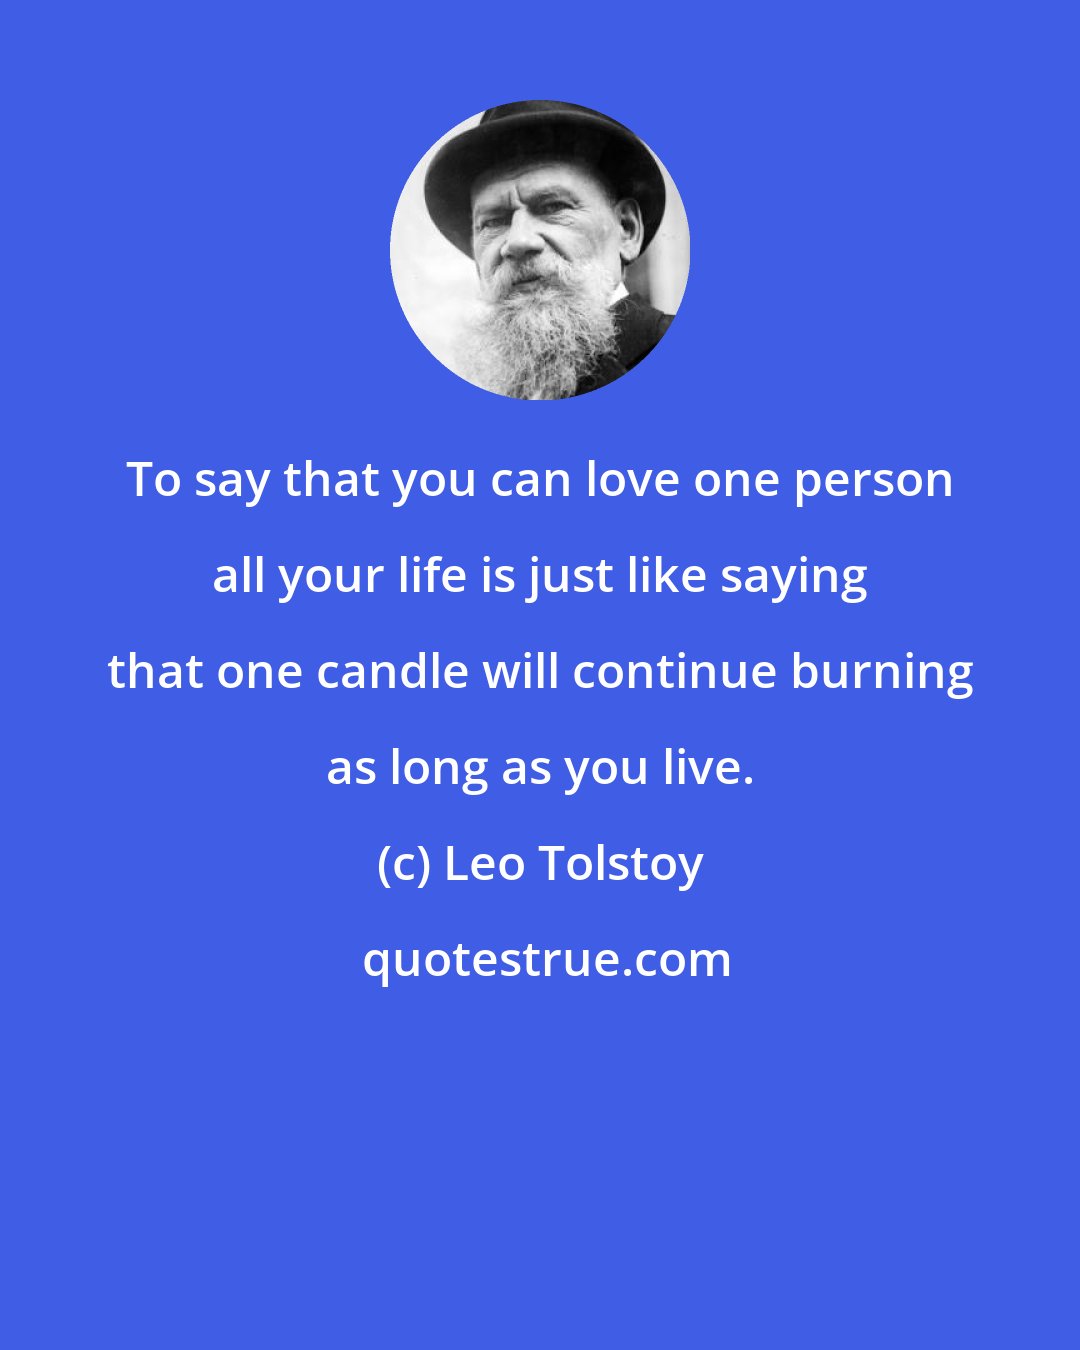 Leo Tolstoy: To say that you can love one person all your life is just like saying that one candle will continue burning as long as you live.